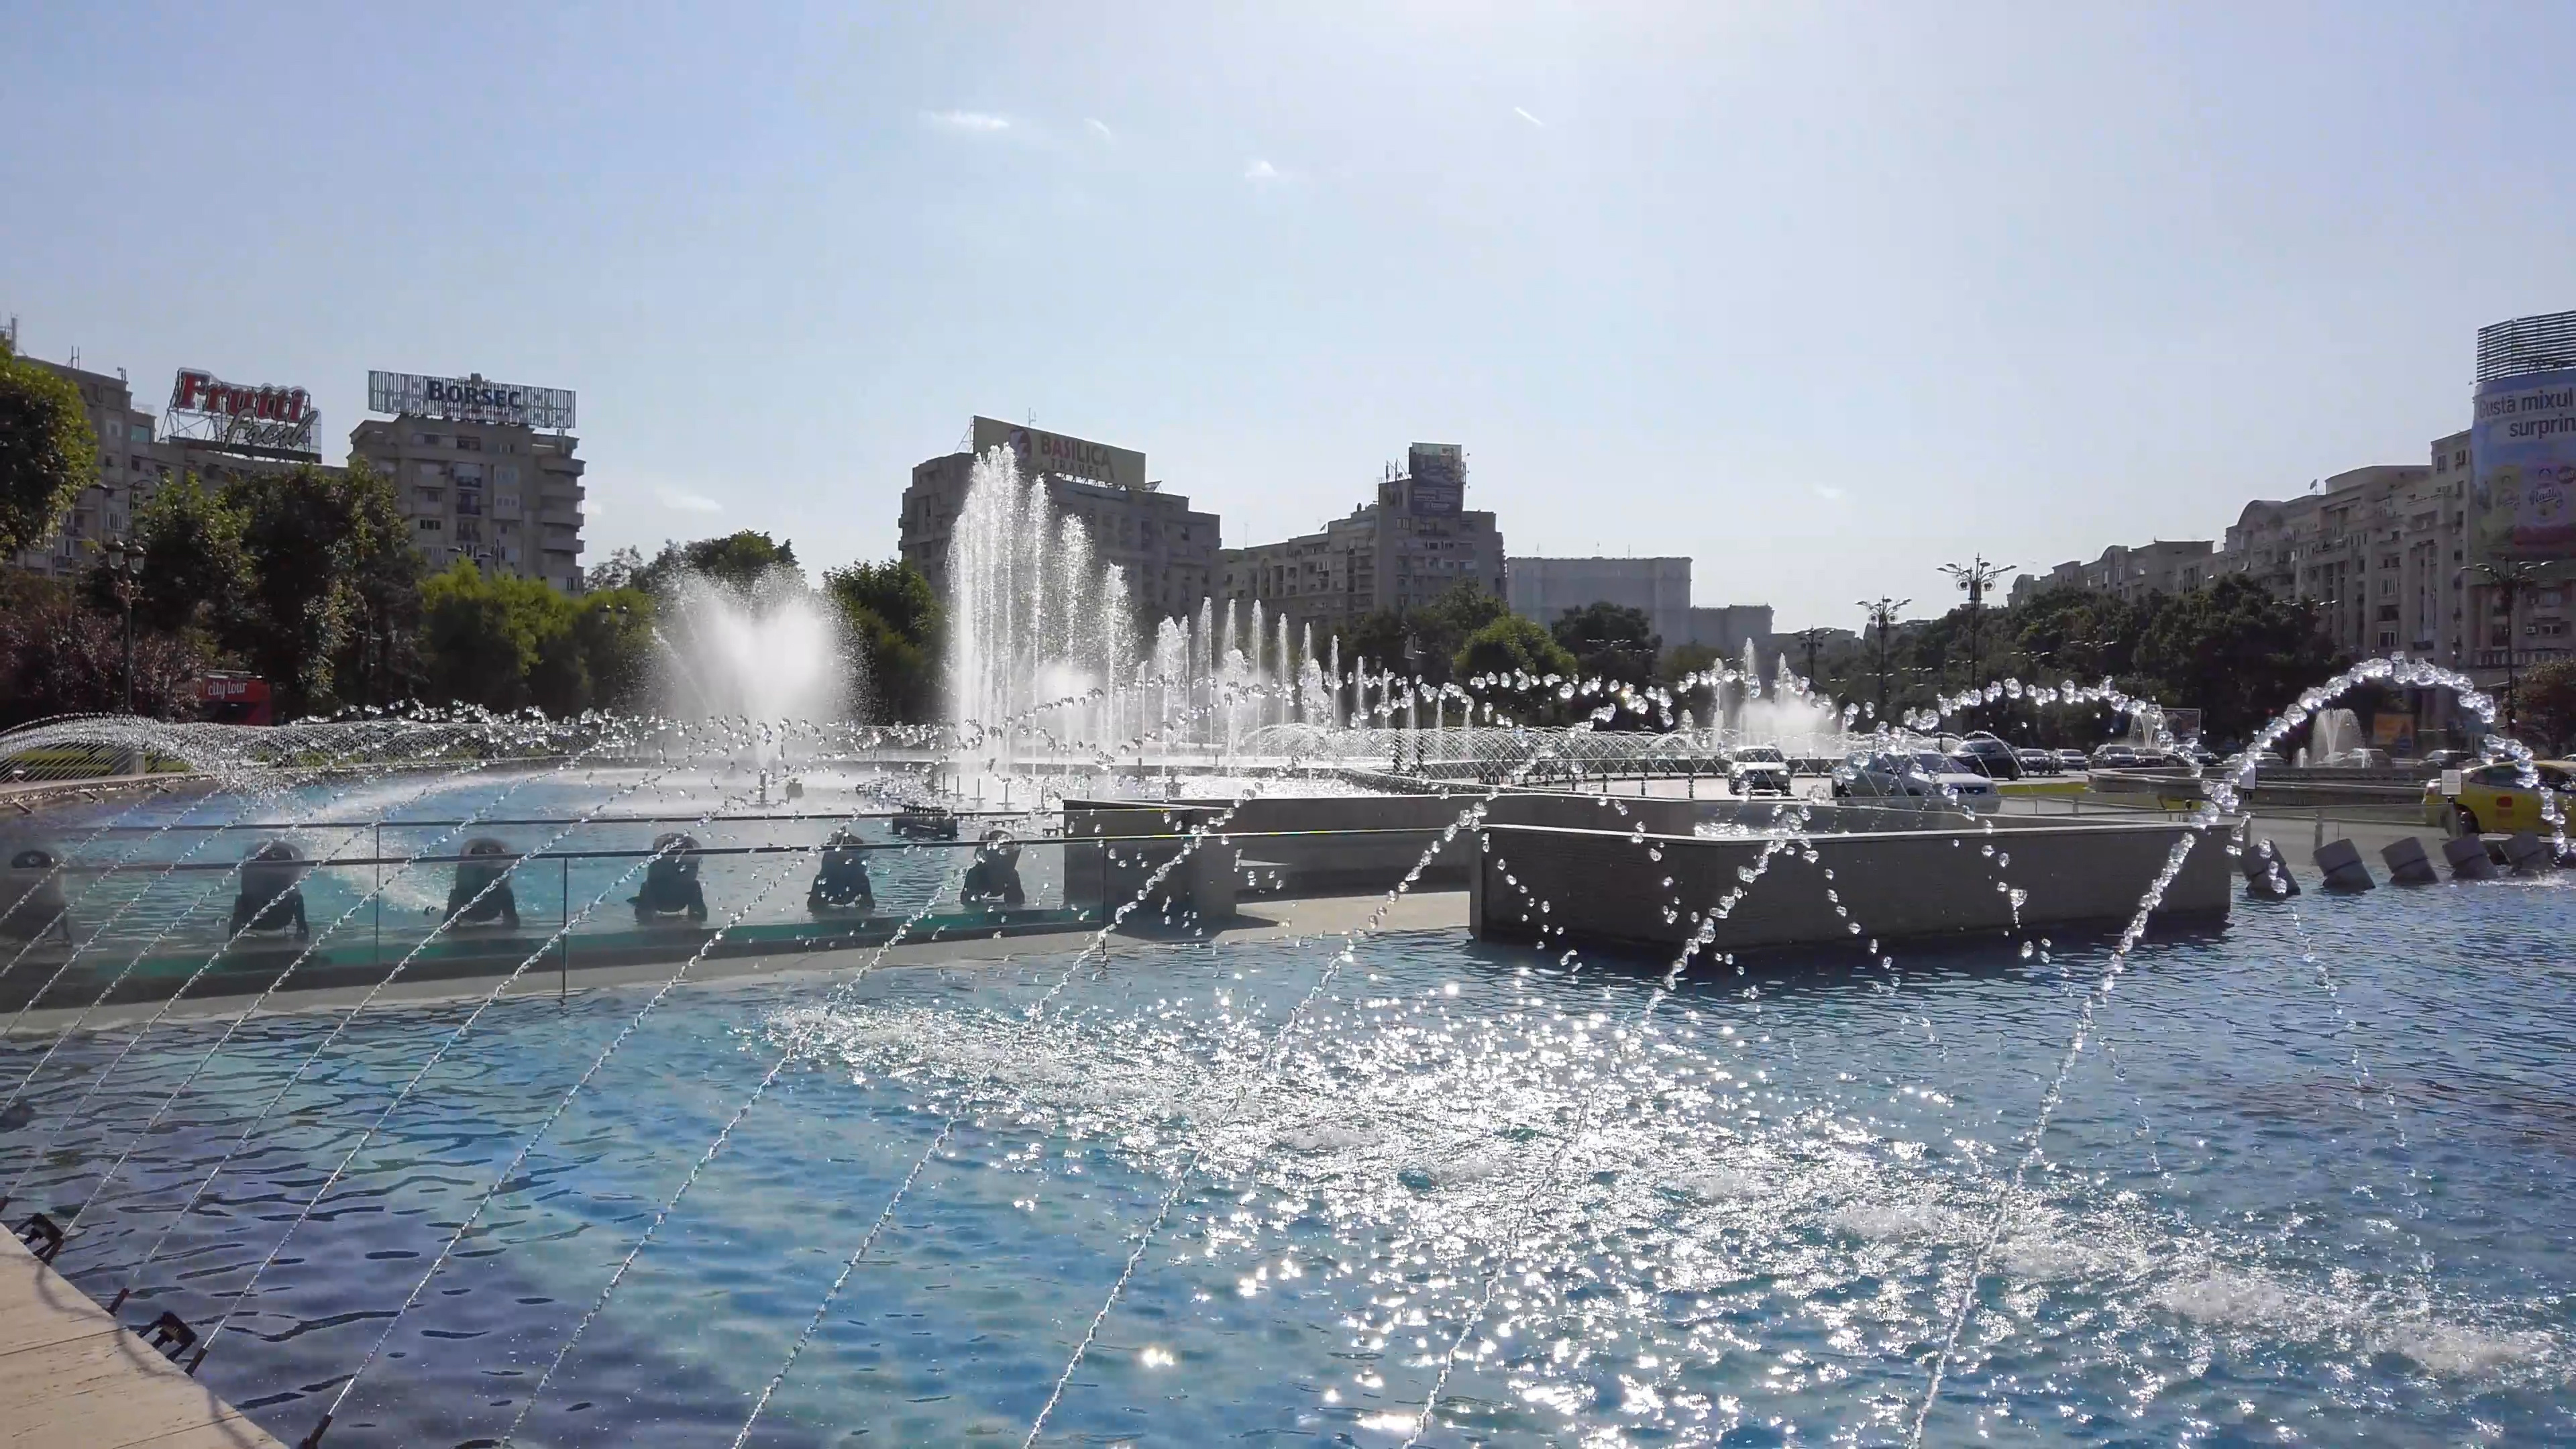 Bucharest travels, Water fountains, Unirii Square, Relaxation video, 3840x2160 4K Desktop